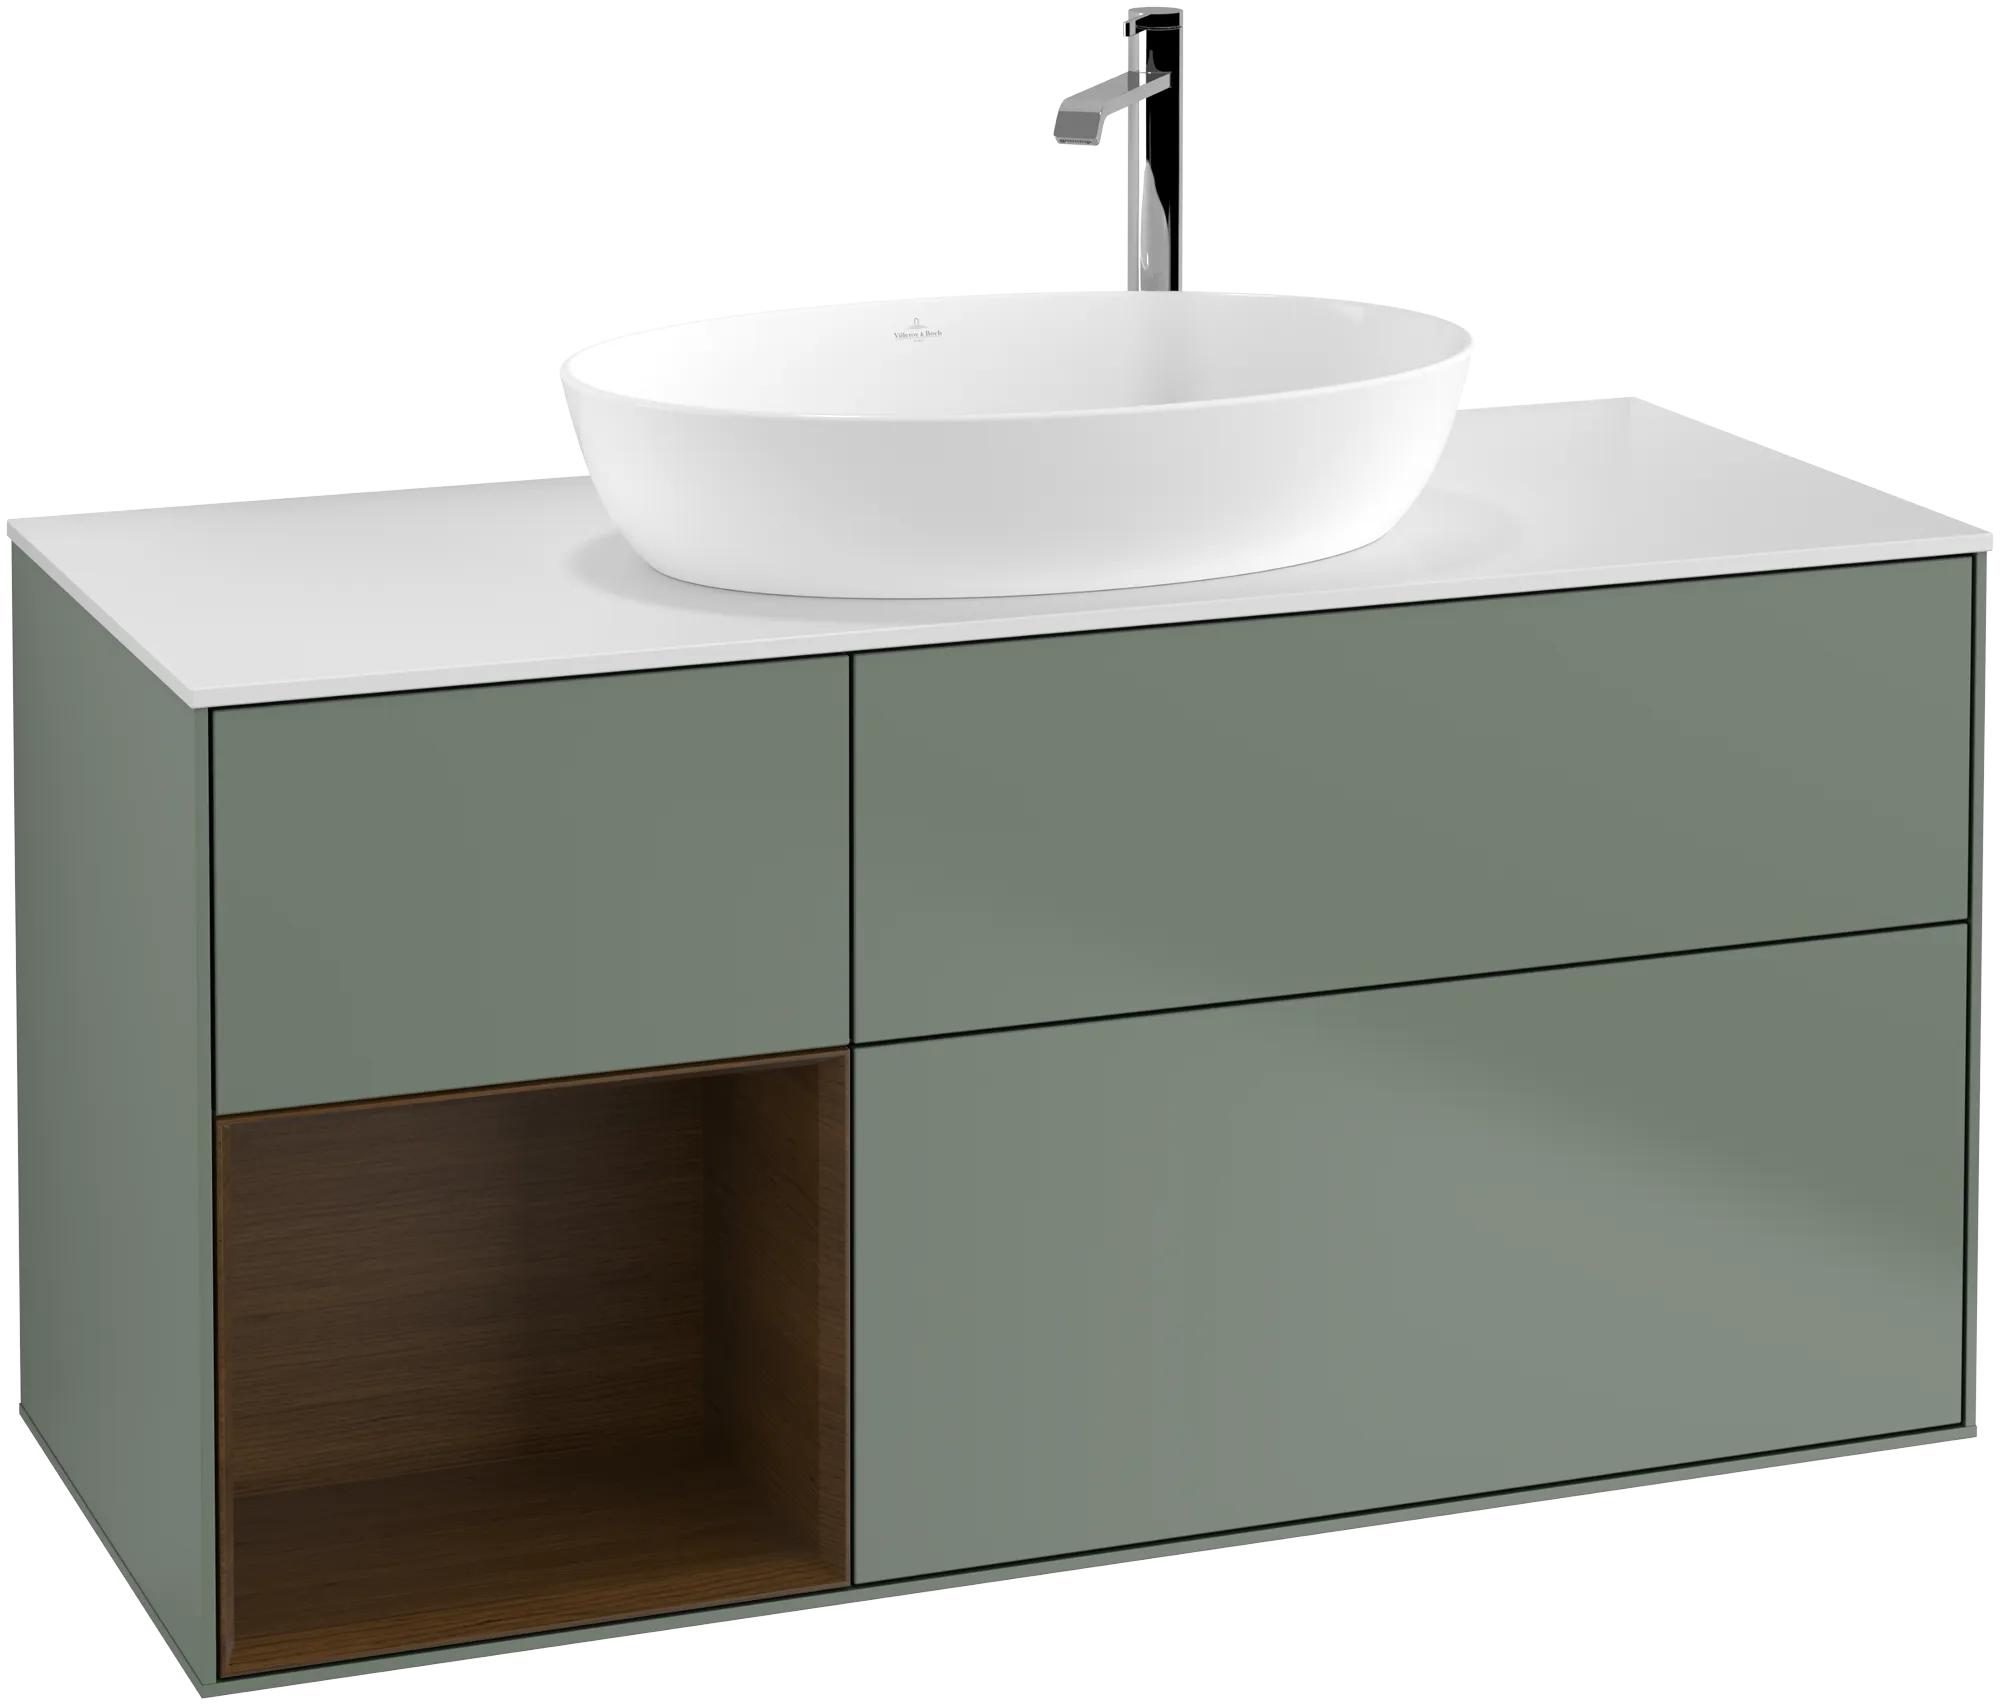 Picture of VILLEROY BOCH Finion Vanity unit, with lighting, 3 pull-out compartments, 1200 x 603 x 501 mm, Olive Matt Lacquer / Walnut Veneer / Glass White Matt #G941GNGM